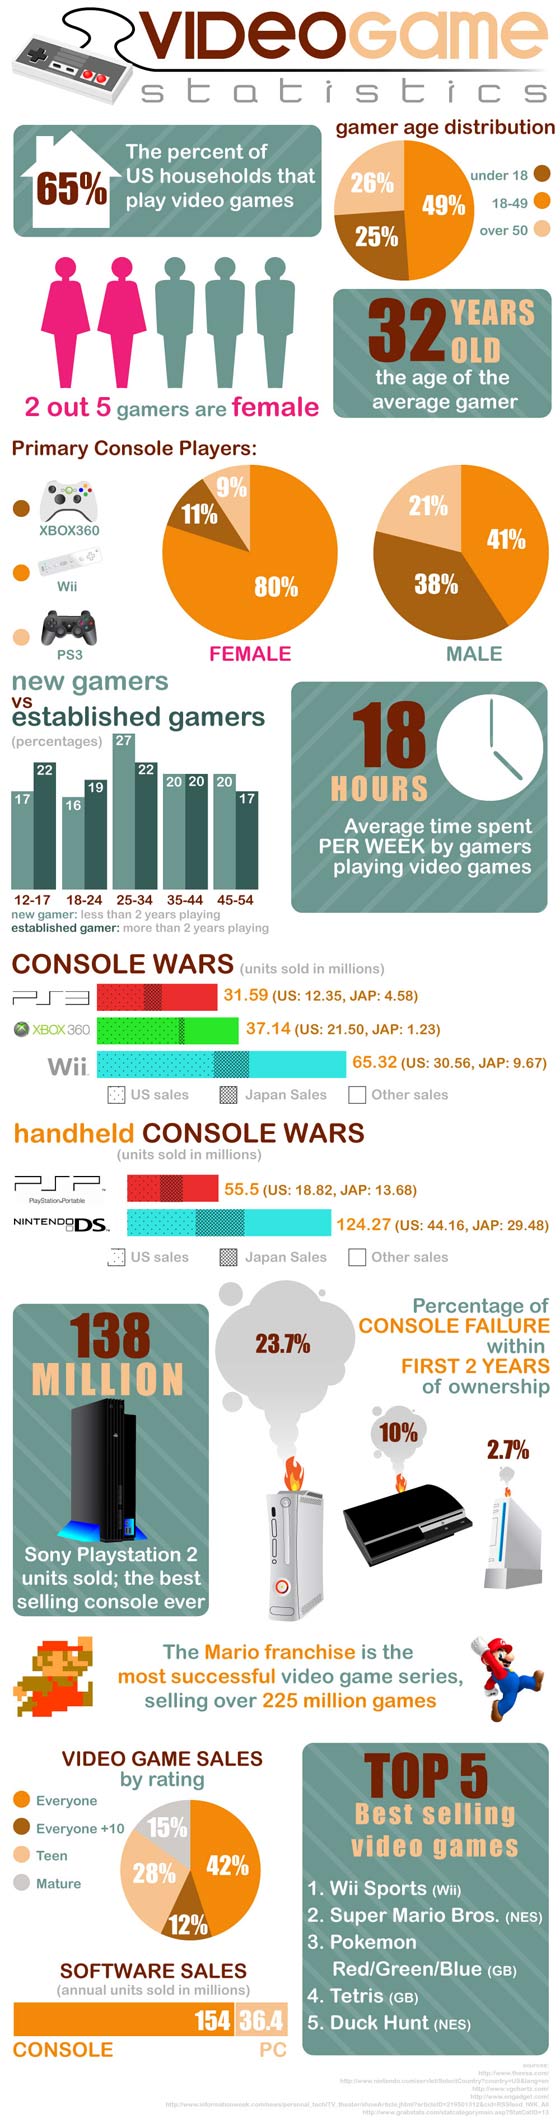 Game consoles facts served up in a neat info-graphic